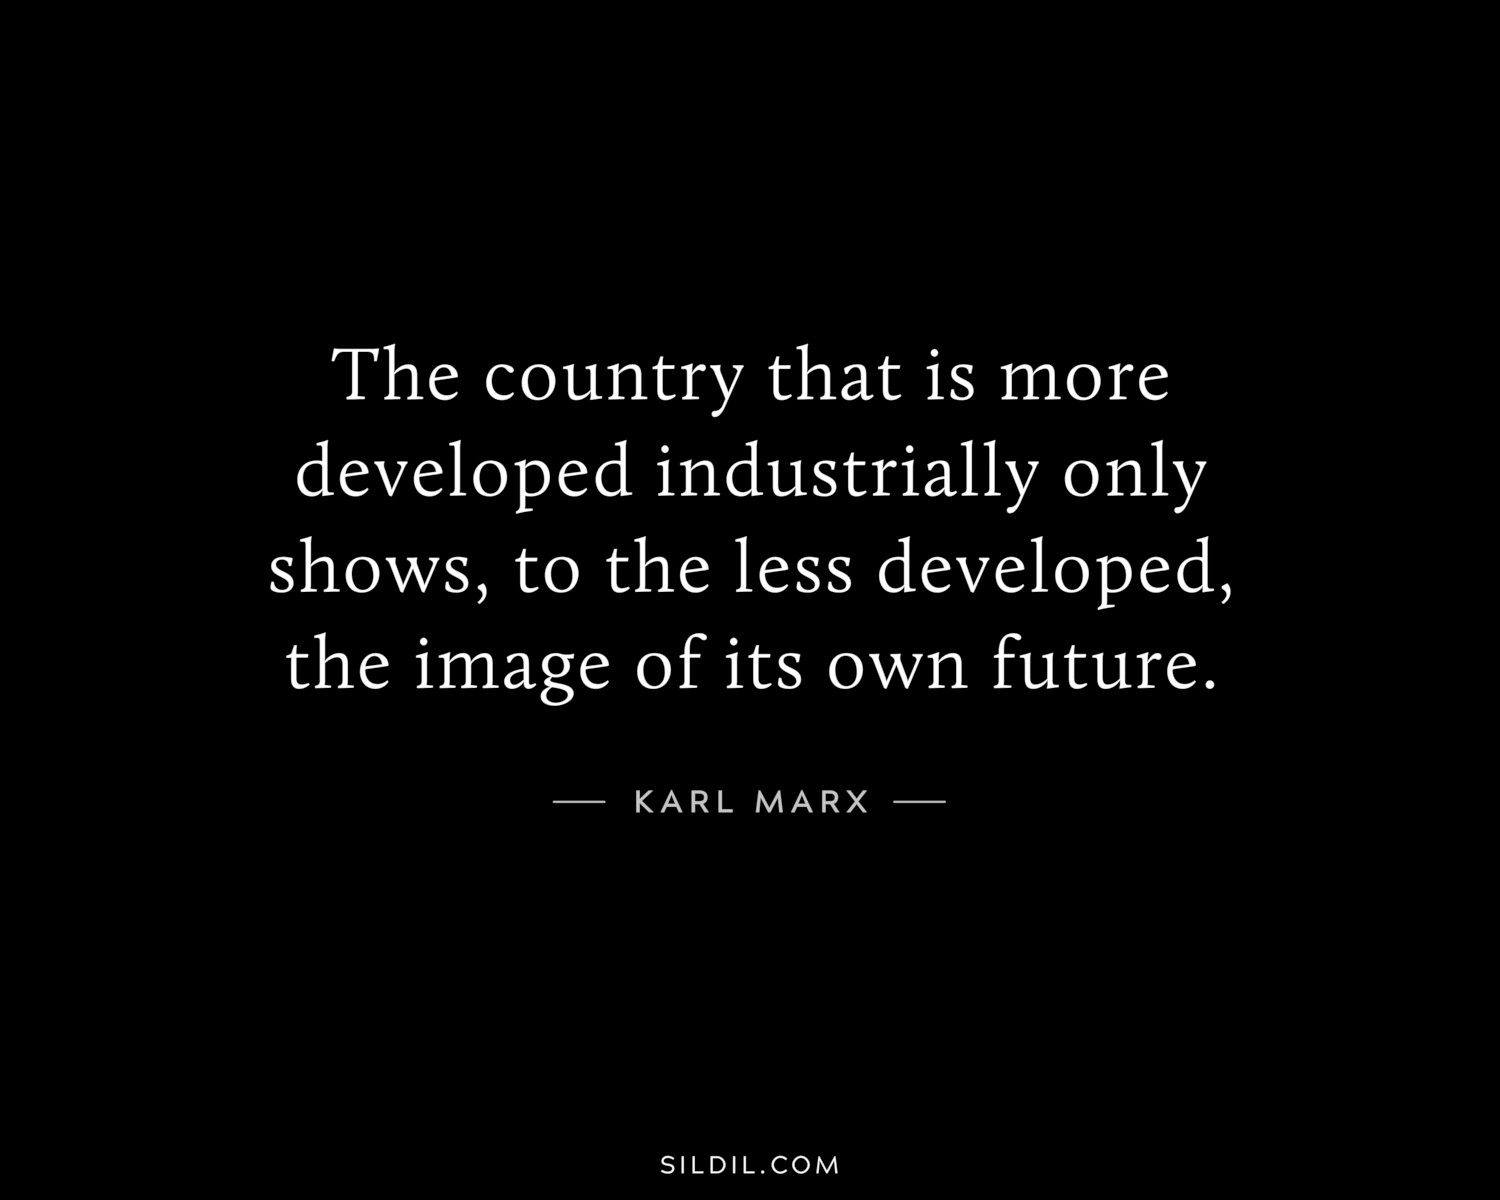 The country that is more developed industrially only shows, to the less developed, the image of its own future.